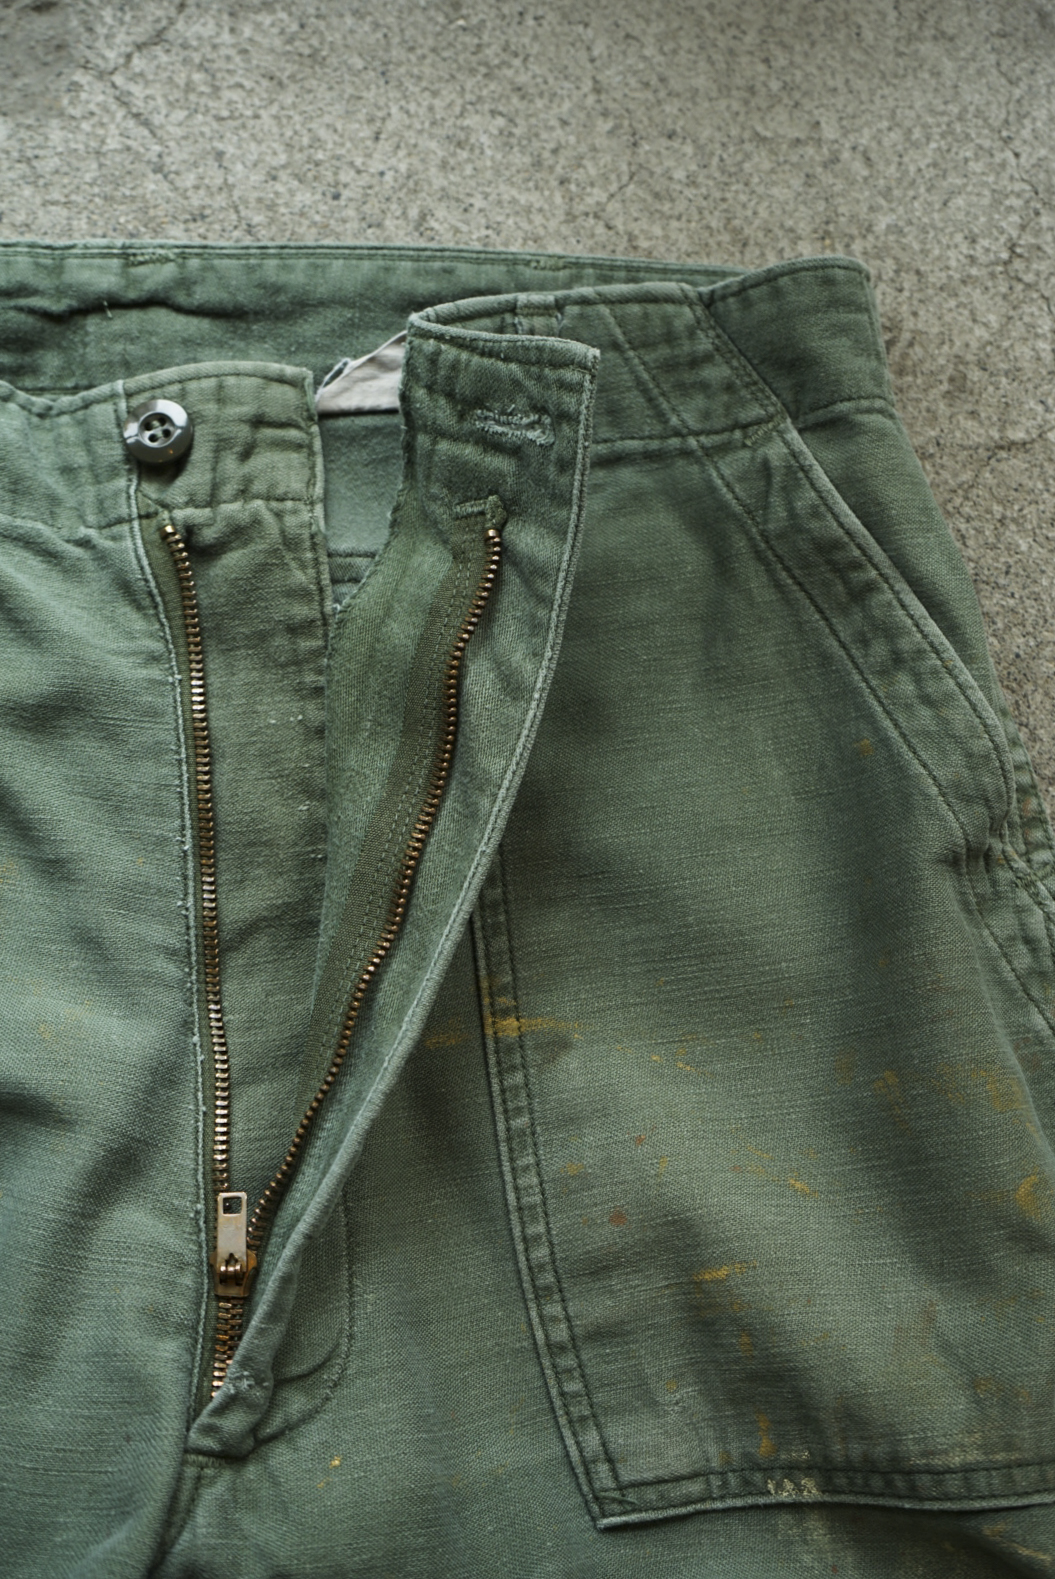 US ARMY BAKER PANTS REPAIRED 02